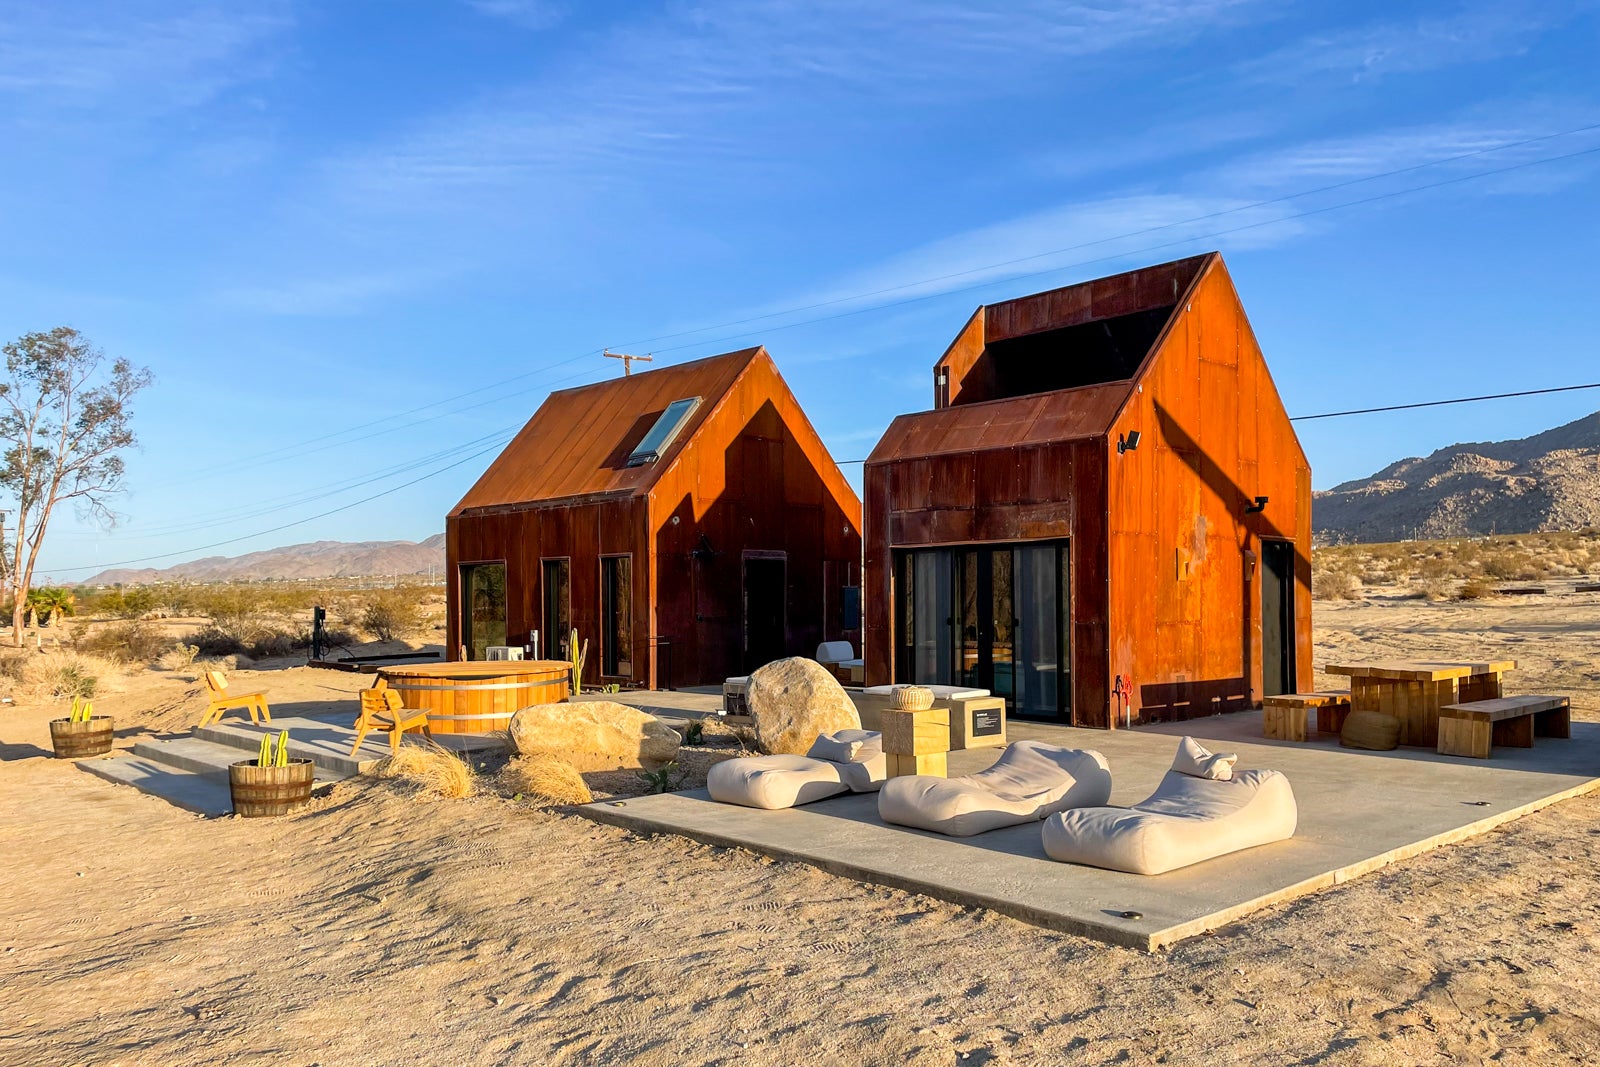 Highs and lows: The best places to stay near Joshua Tree National Park